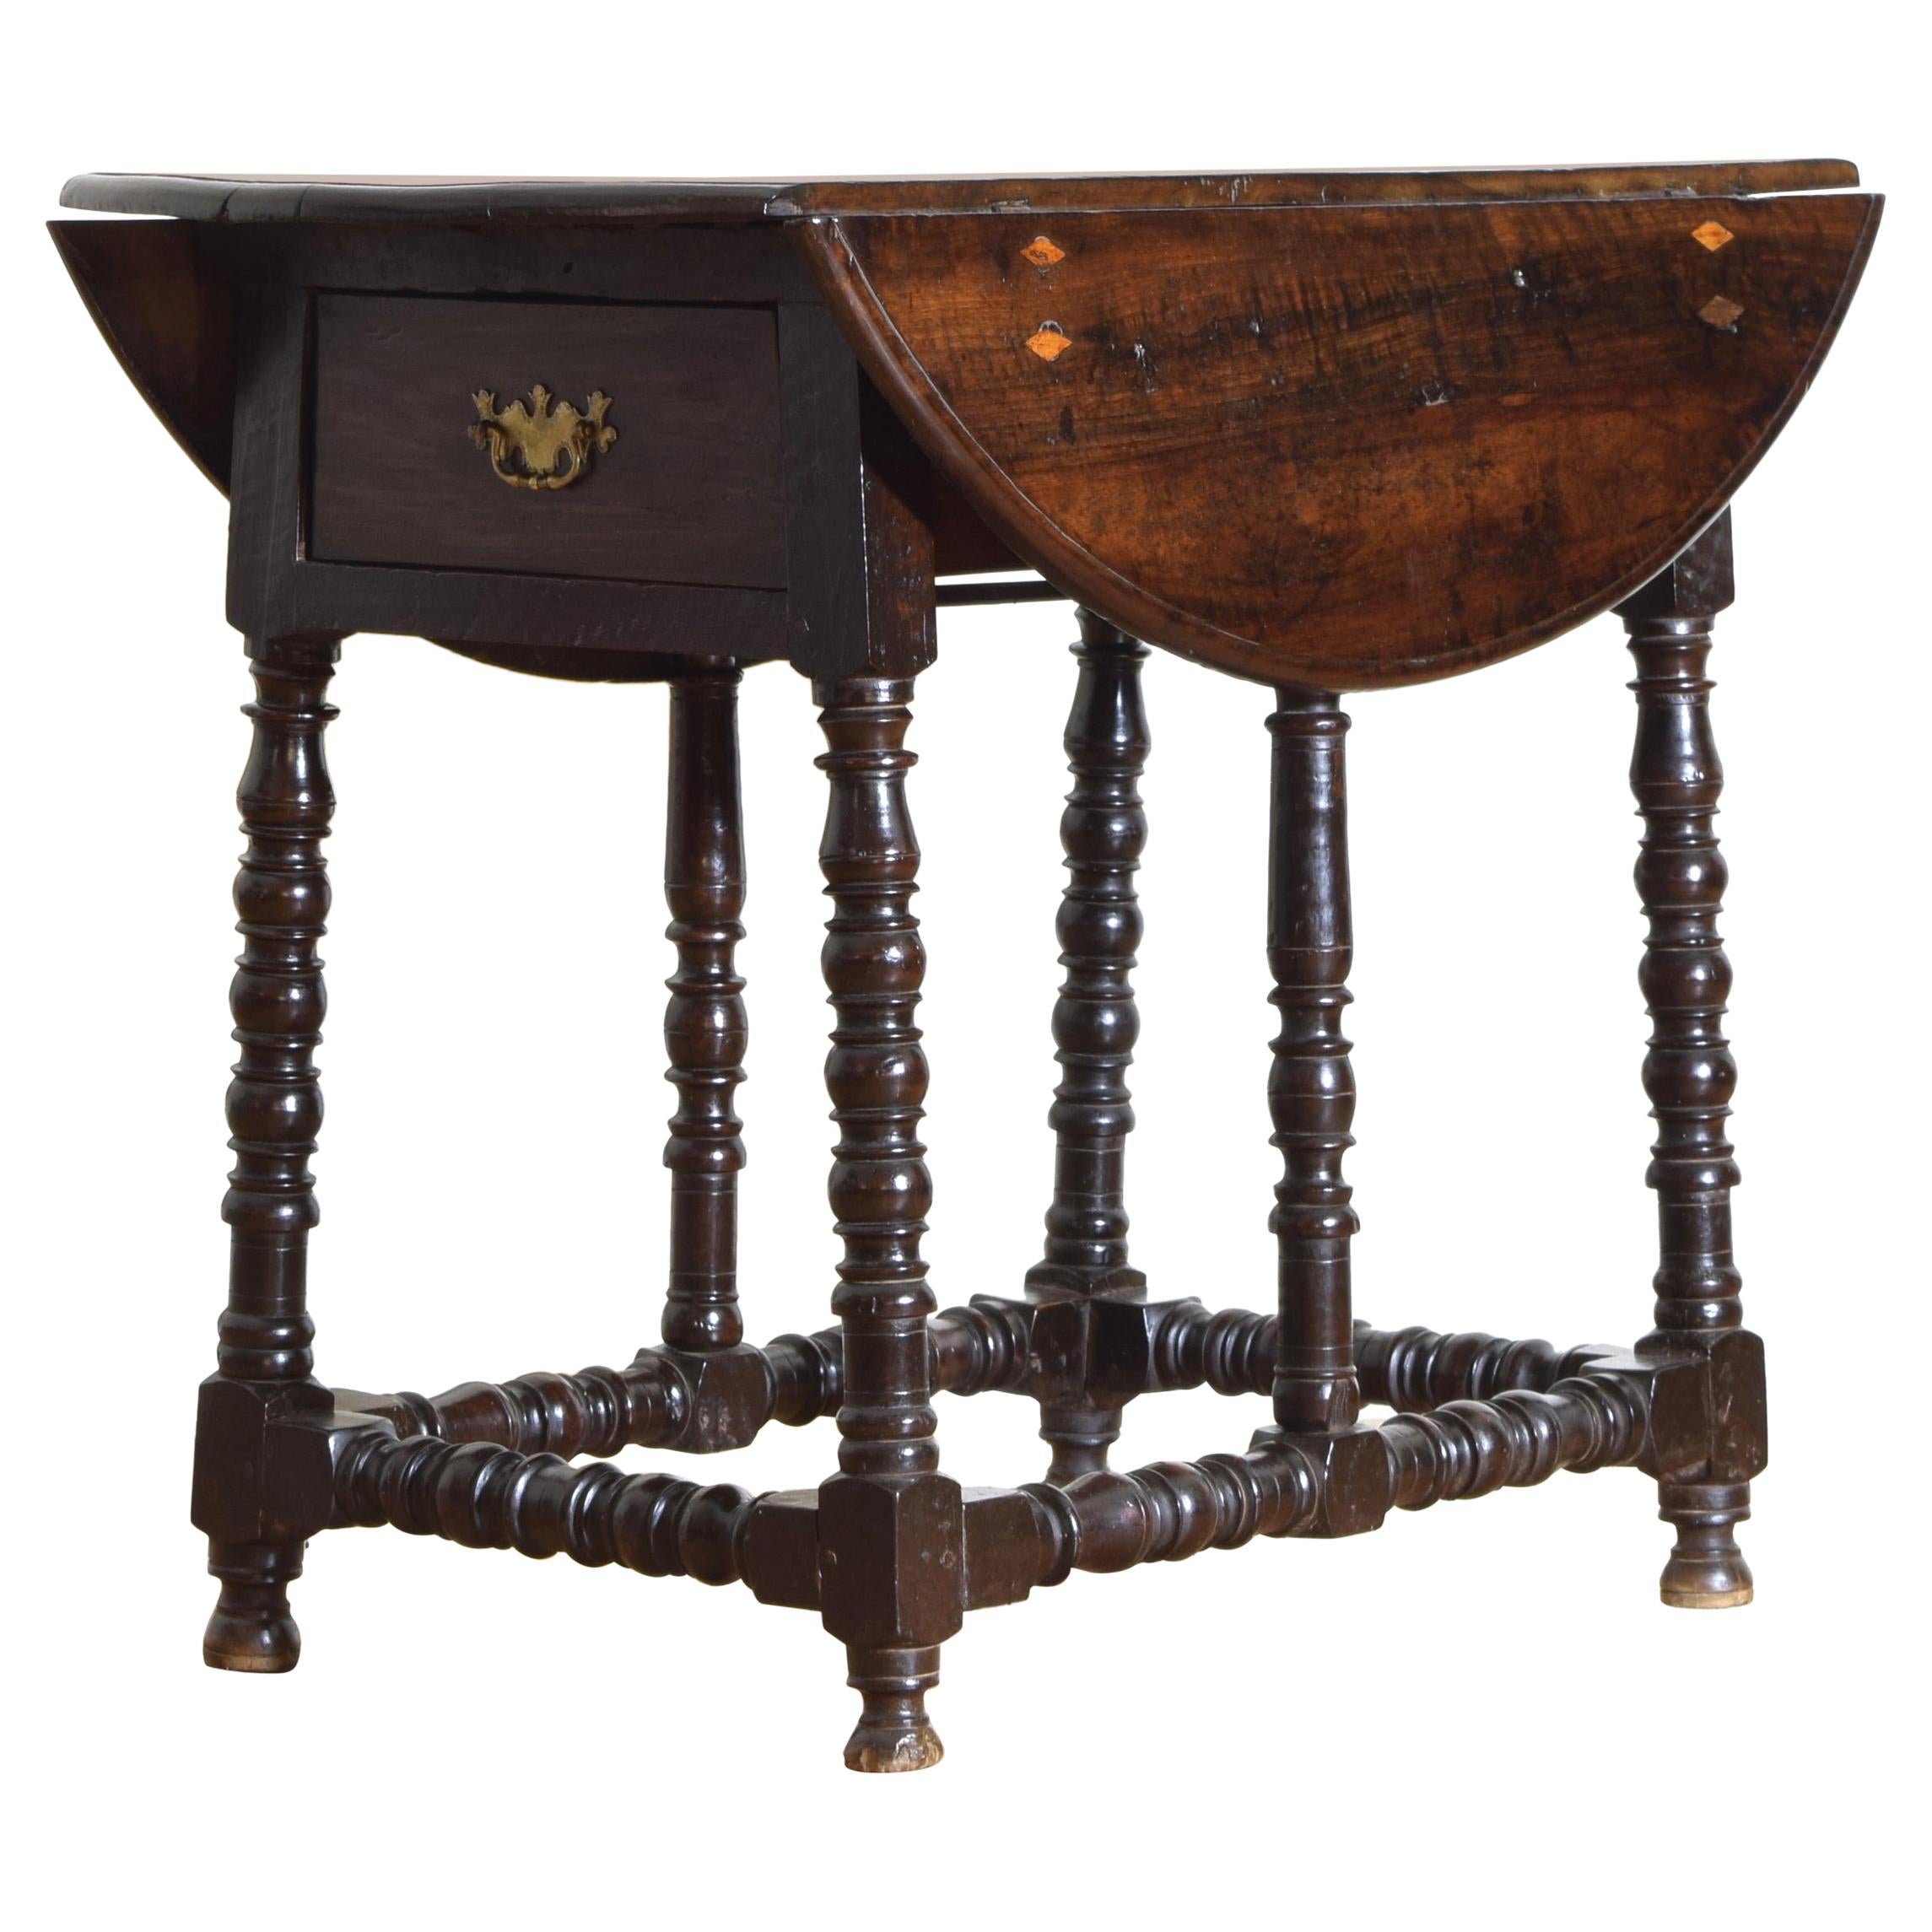 Portuguese Late Baroque Walnut and Inlaid 1-Drawer Drop-leaf Table